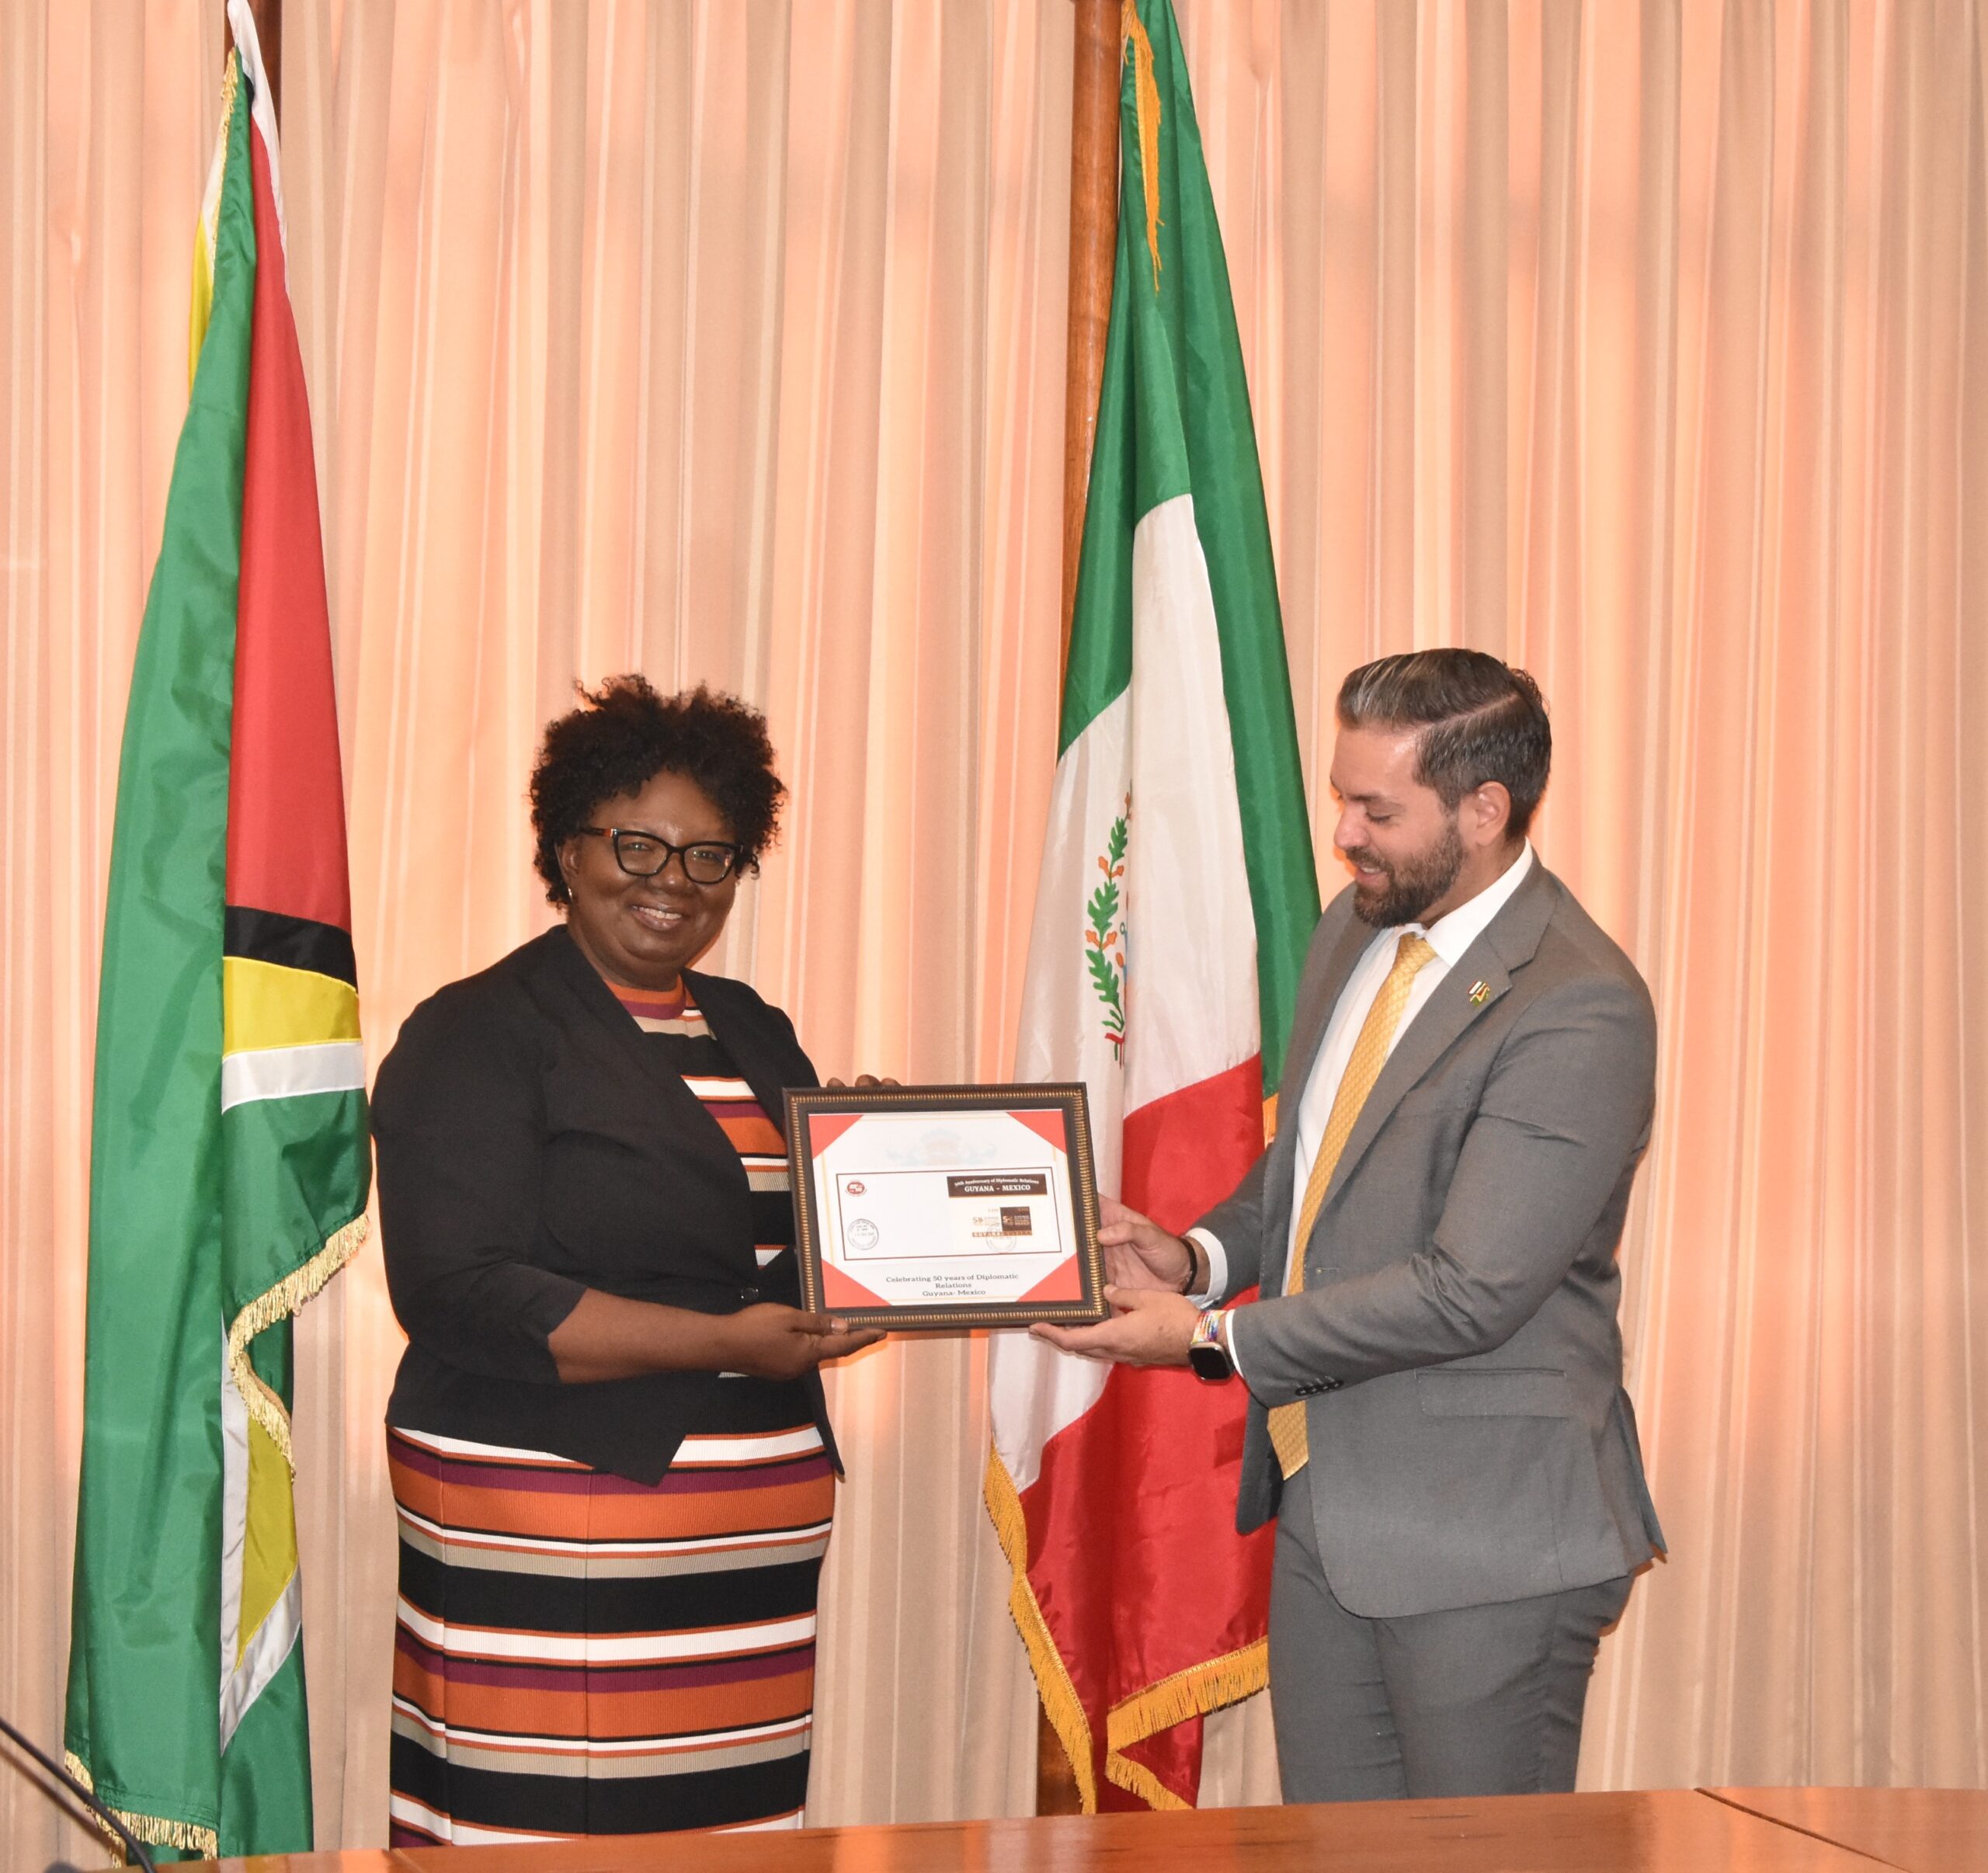 Stamp Commemorating Diplomatic Relations Between Guyana and Mexico Released